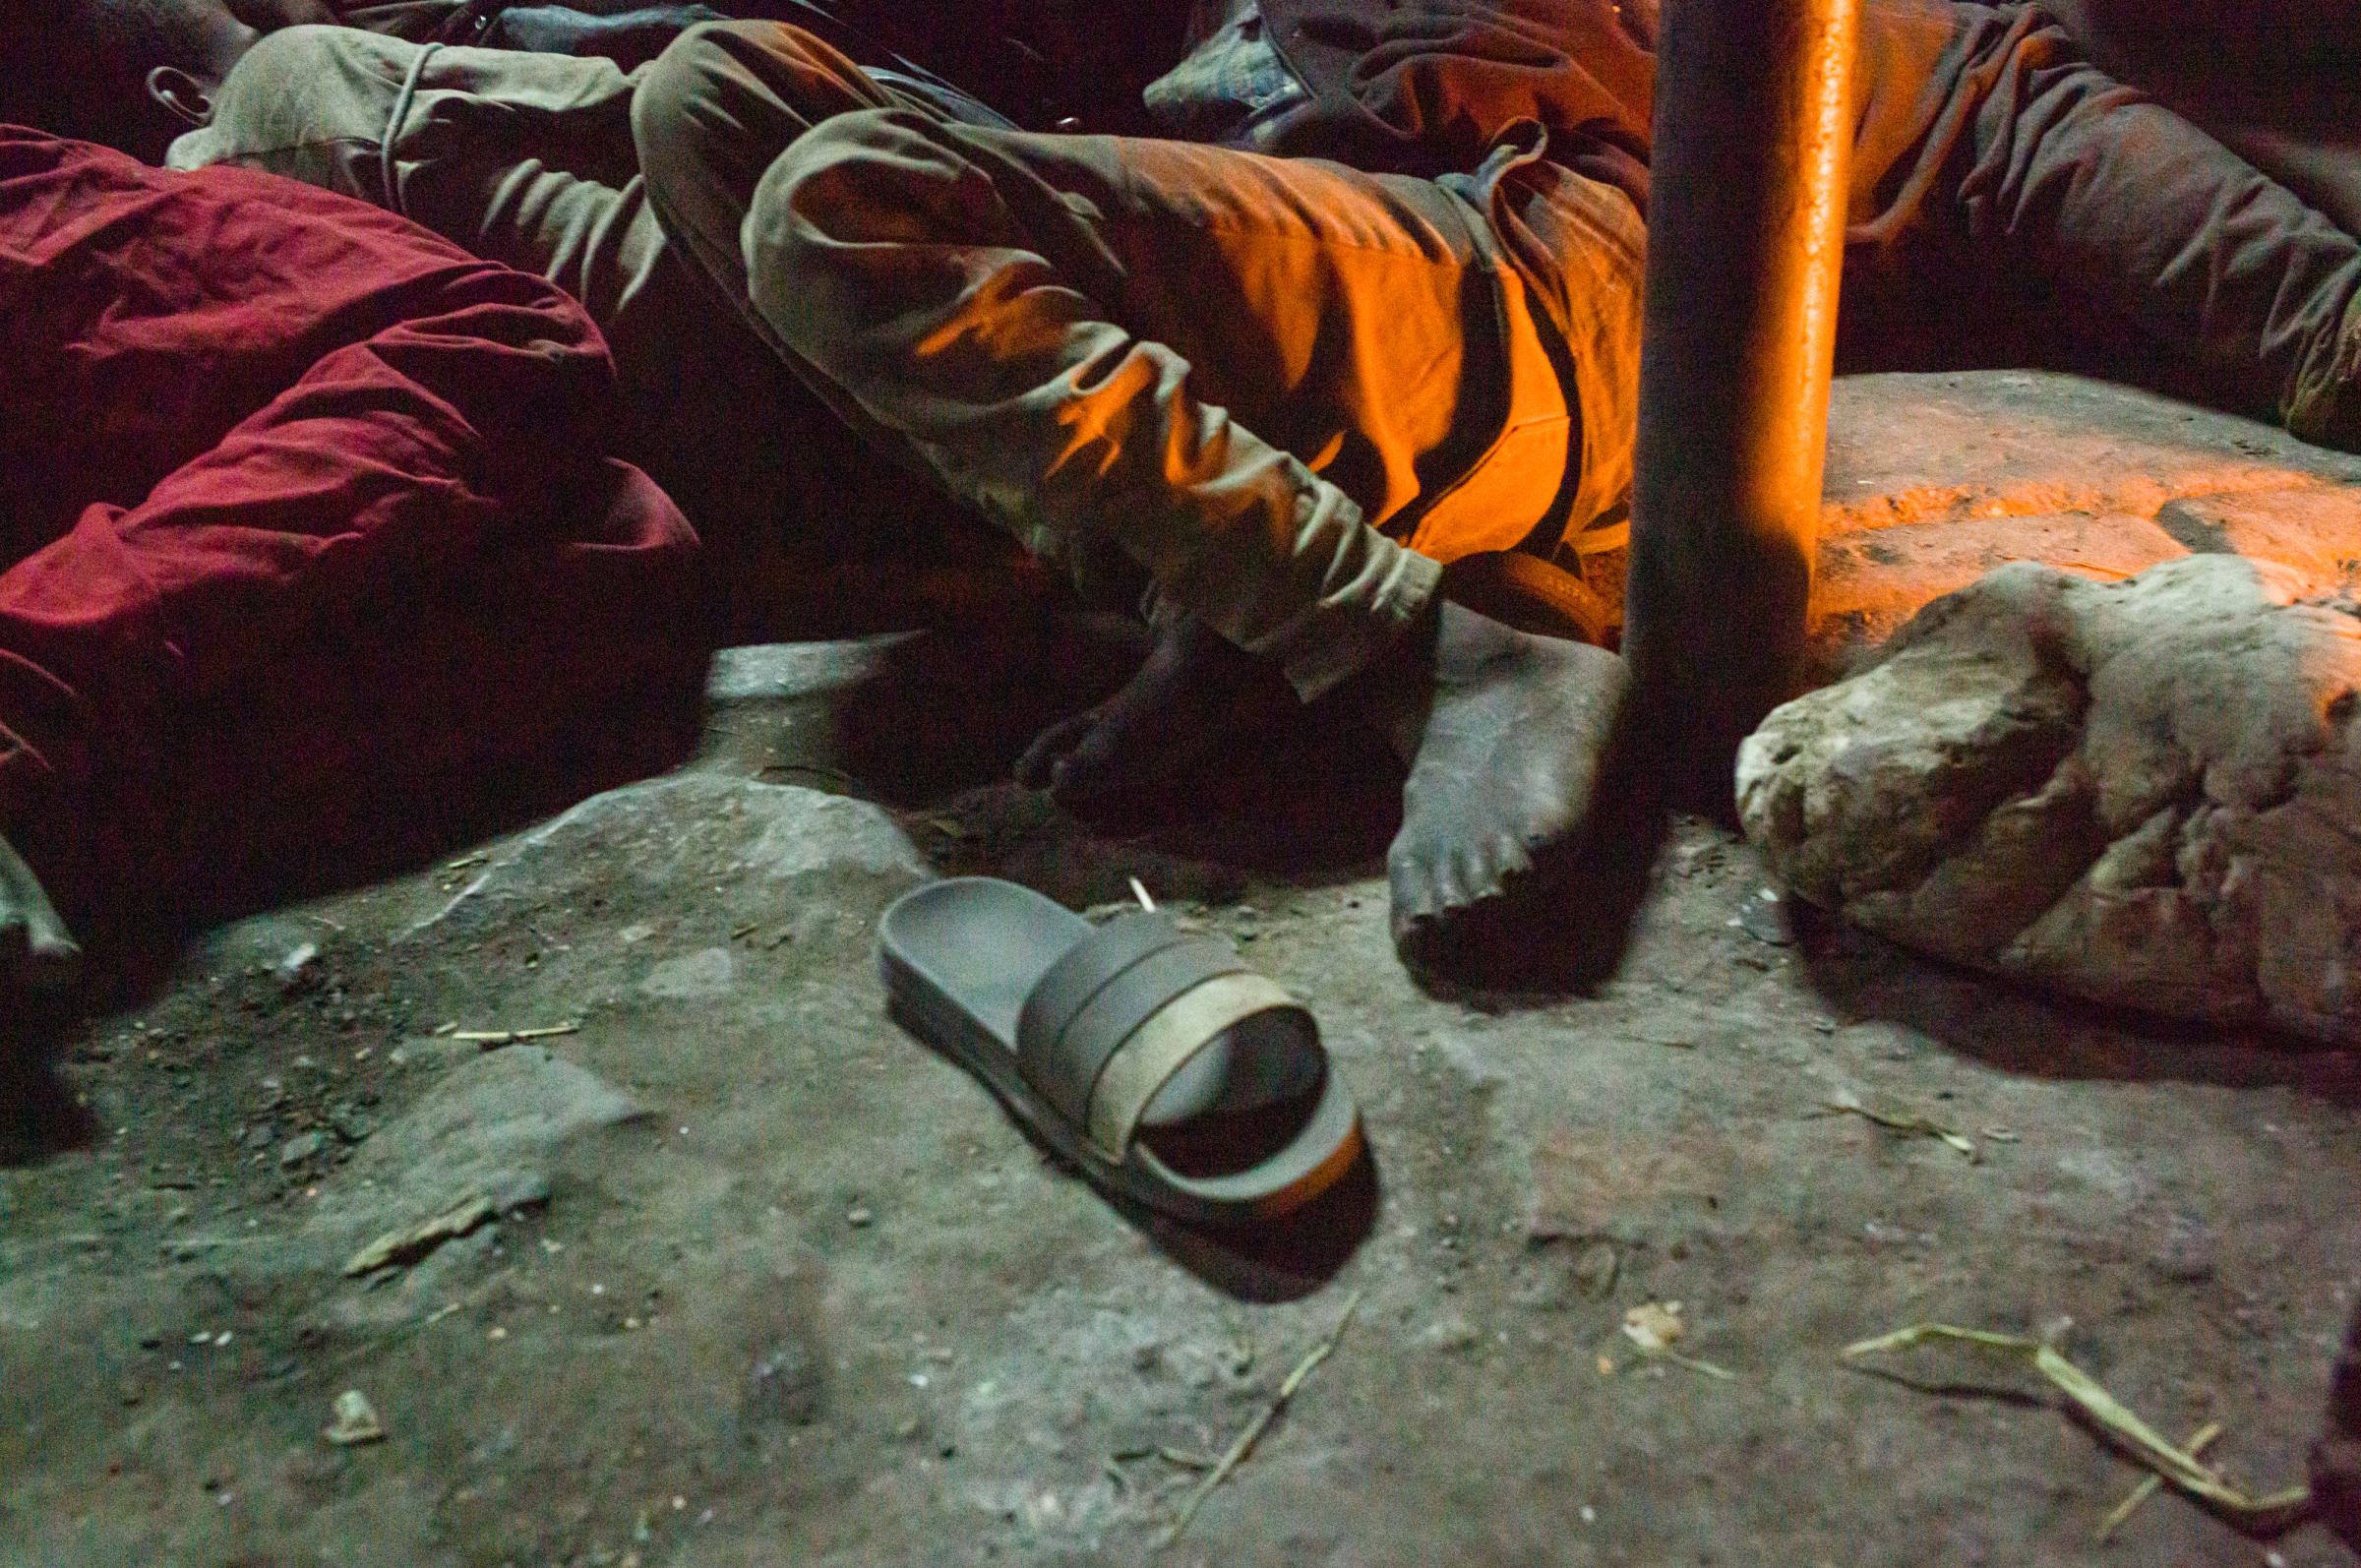 Life on the street in Lusaka - Sleeping on the streets - literally, on the hard pavement. The shoe is a reminder that the total...